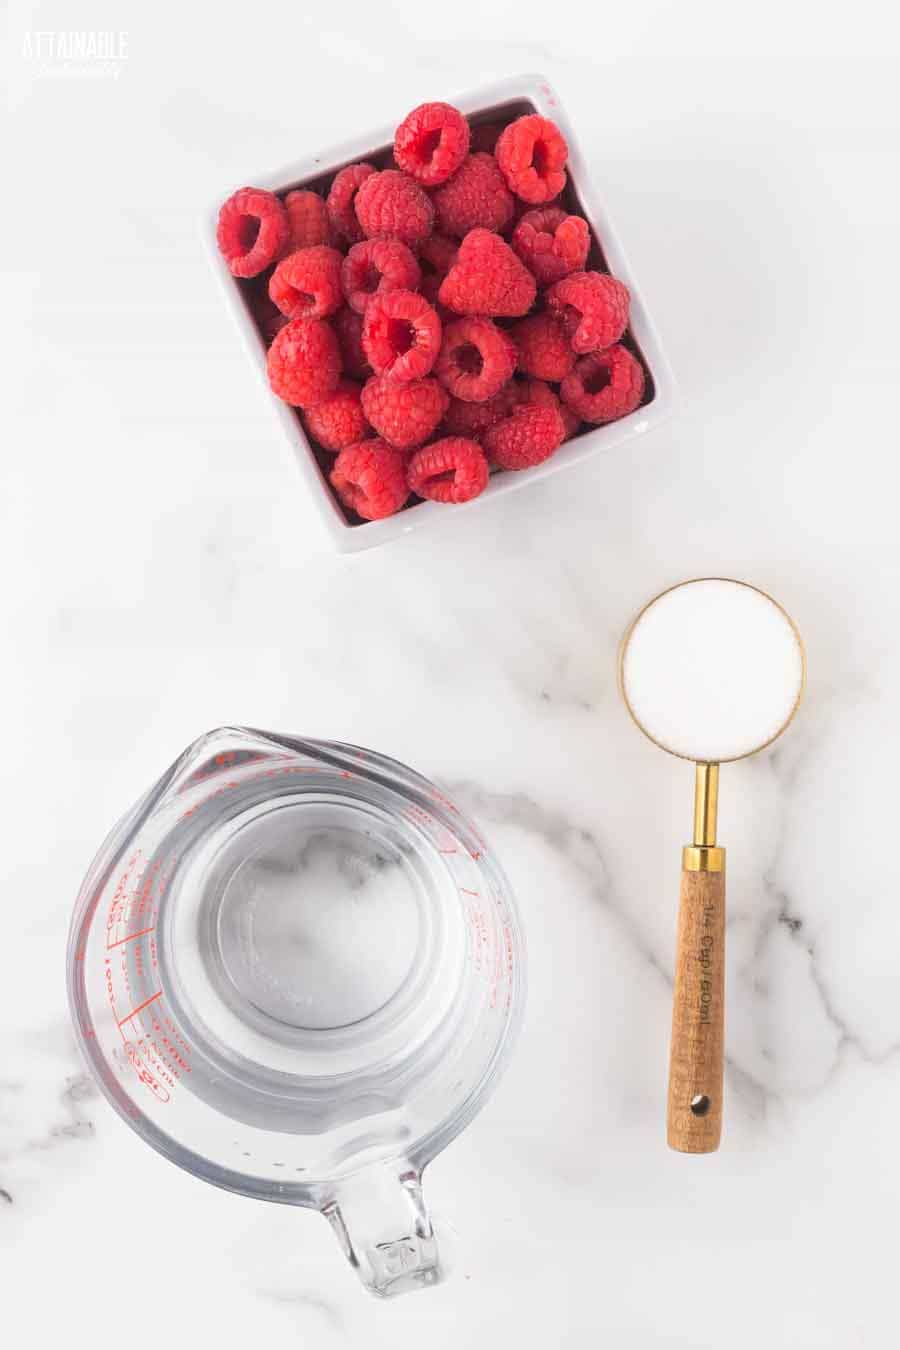 box of raspberries, measuring cup of water, sugar in a wooden handled measuring cup.